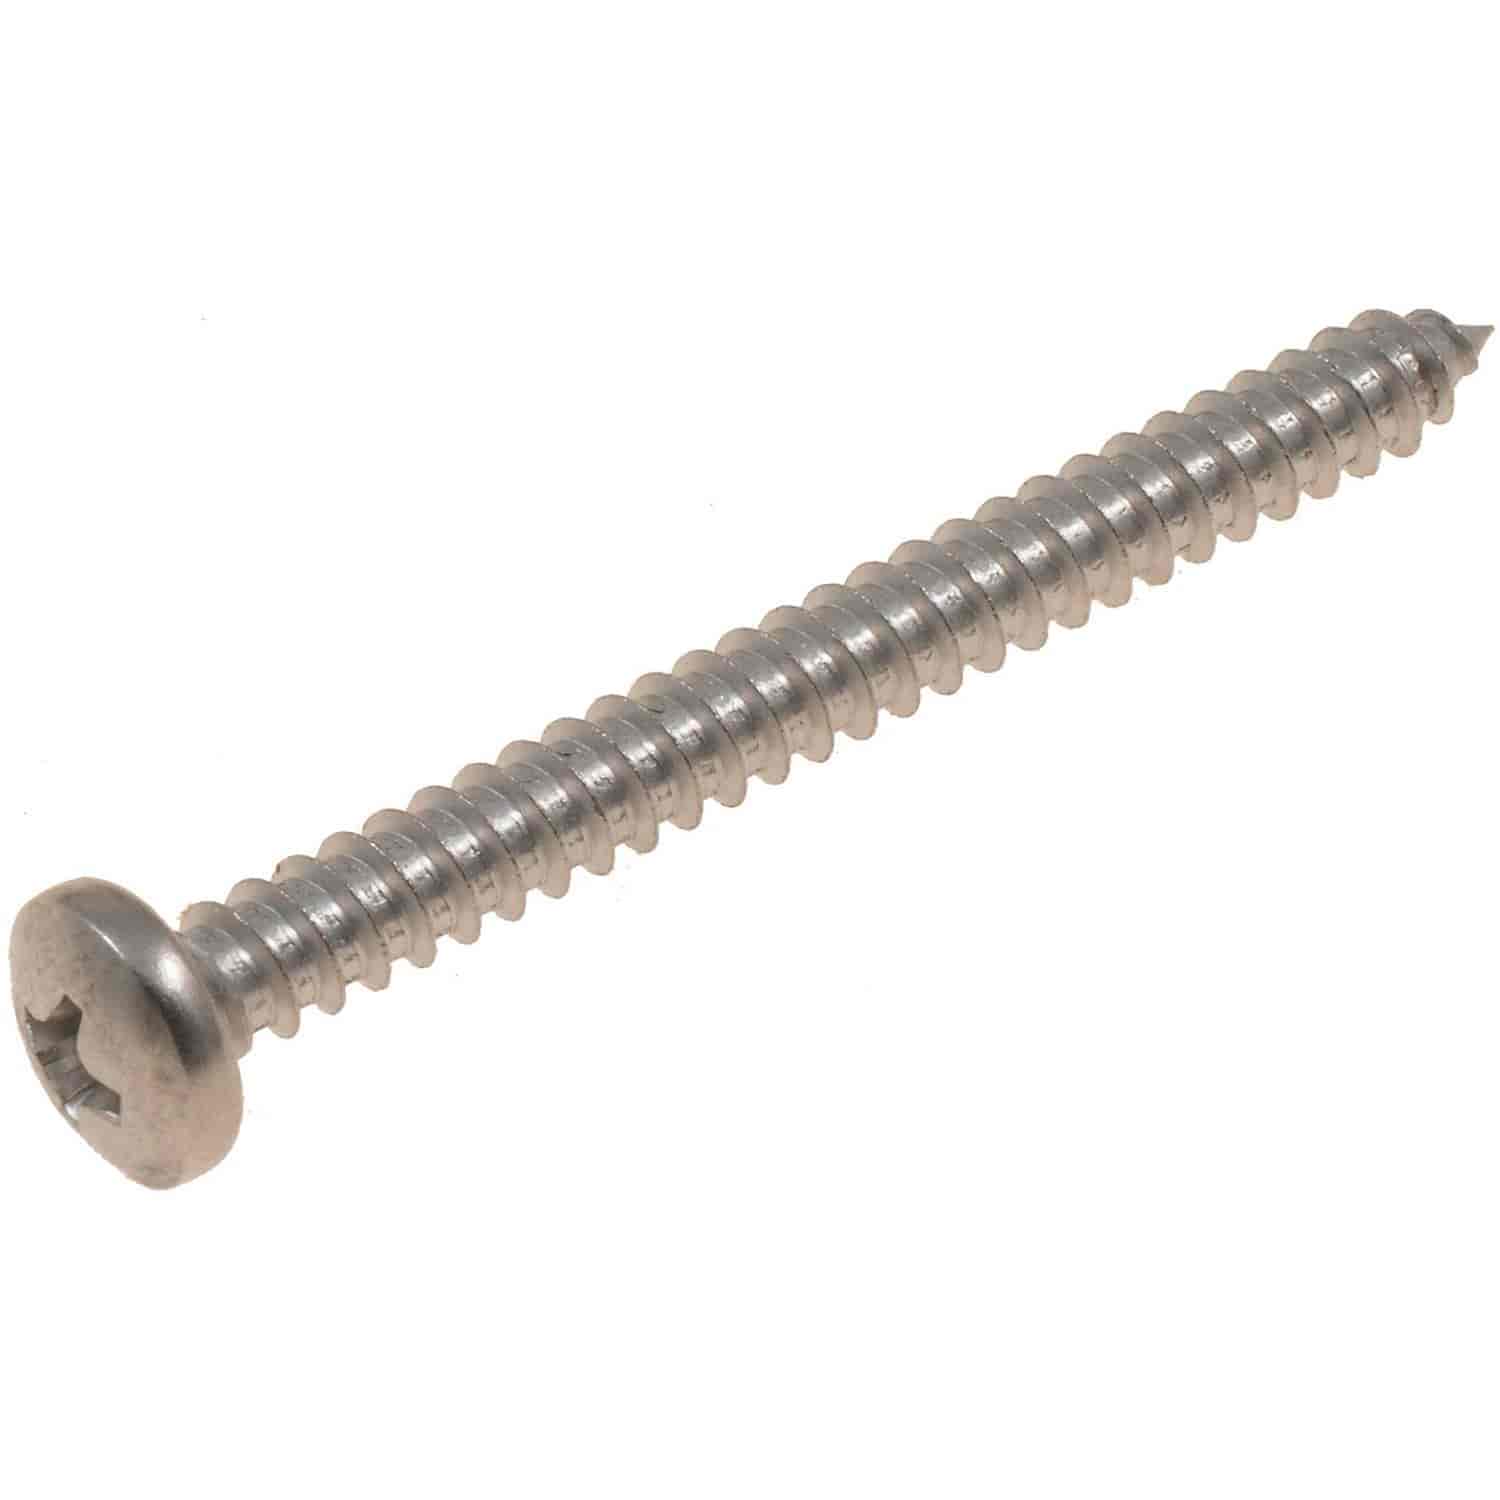 Self Tapping Screw-Stainless Steel-Pan Phillips Head-No. 10 x 2 In.